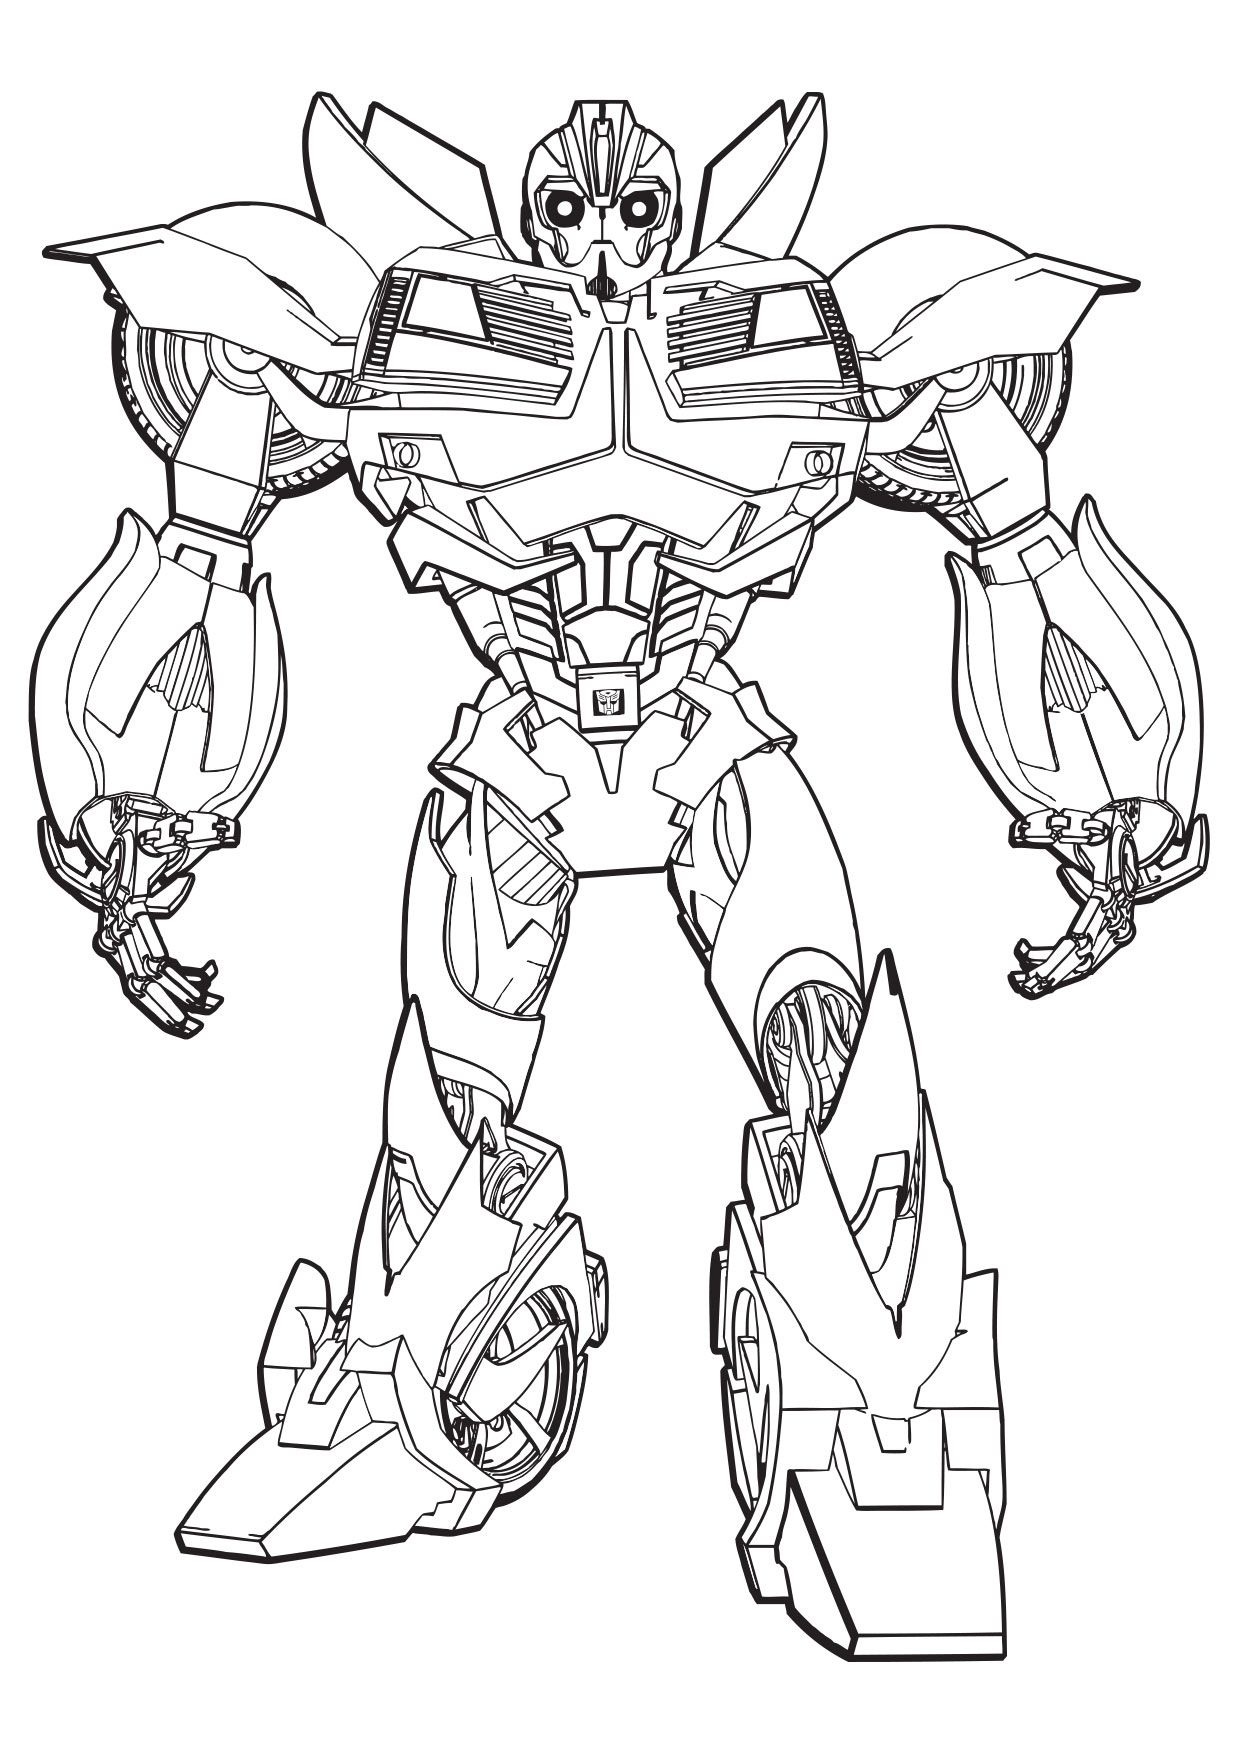 Cool Bumblebee Coloring Page - Free Printable Coloring Pages for Kids